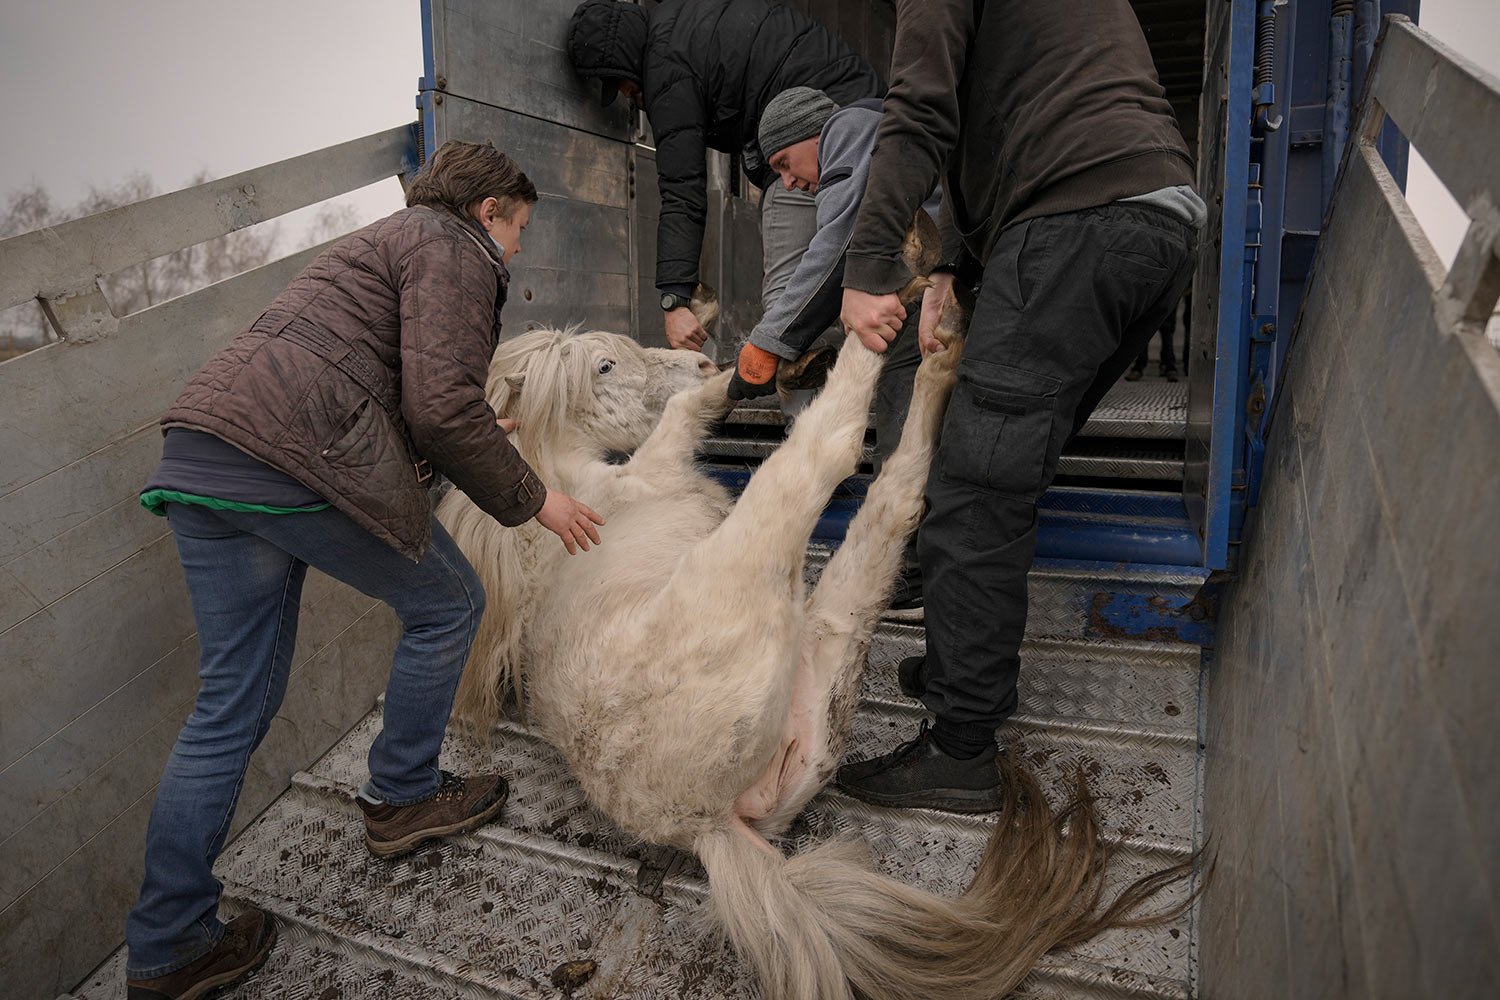  Volunteers drag a pony that collapsed due to stress on a truck at a heavily damaged private zoo while attempting to evacuate the surviving animals to safety in the village of Yasnohorodka, on the outskirts of Kyiv, Ukraine, Wednesday, March 30, 2022